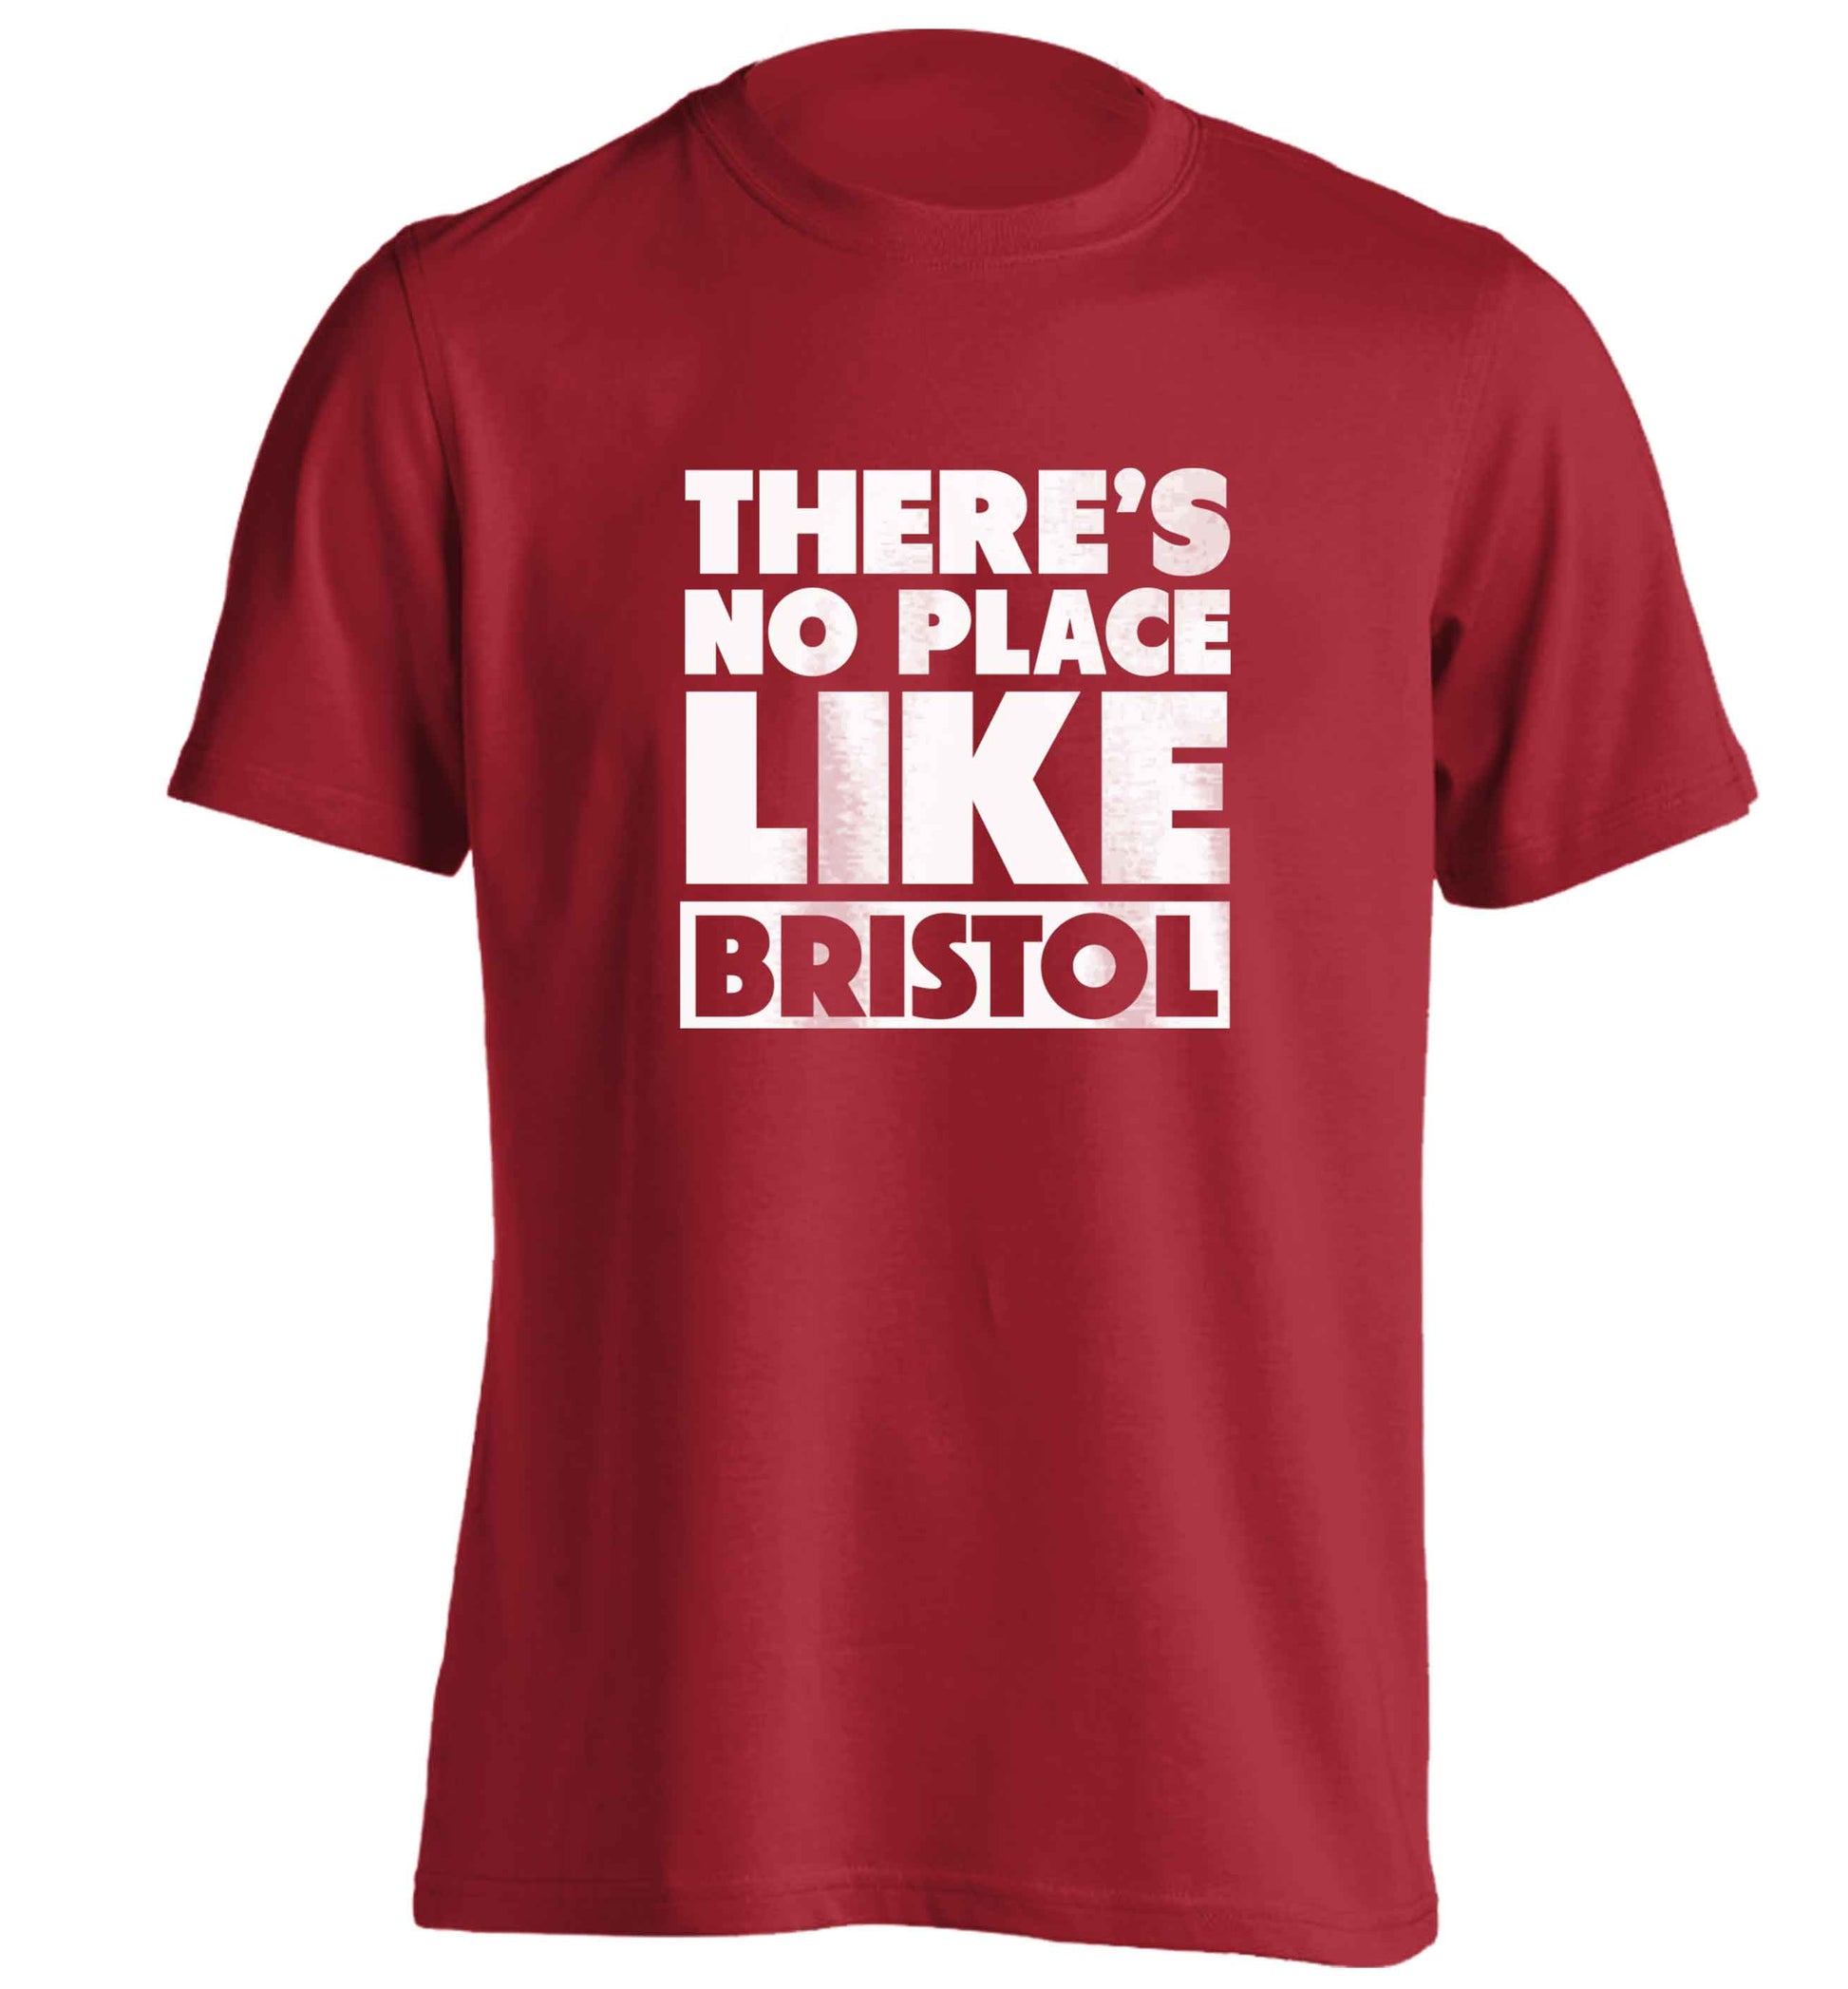 There's no place like Bristol adults unisex red Tshirt 2XL